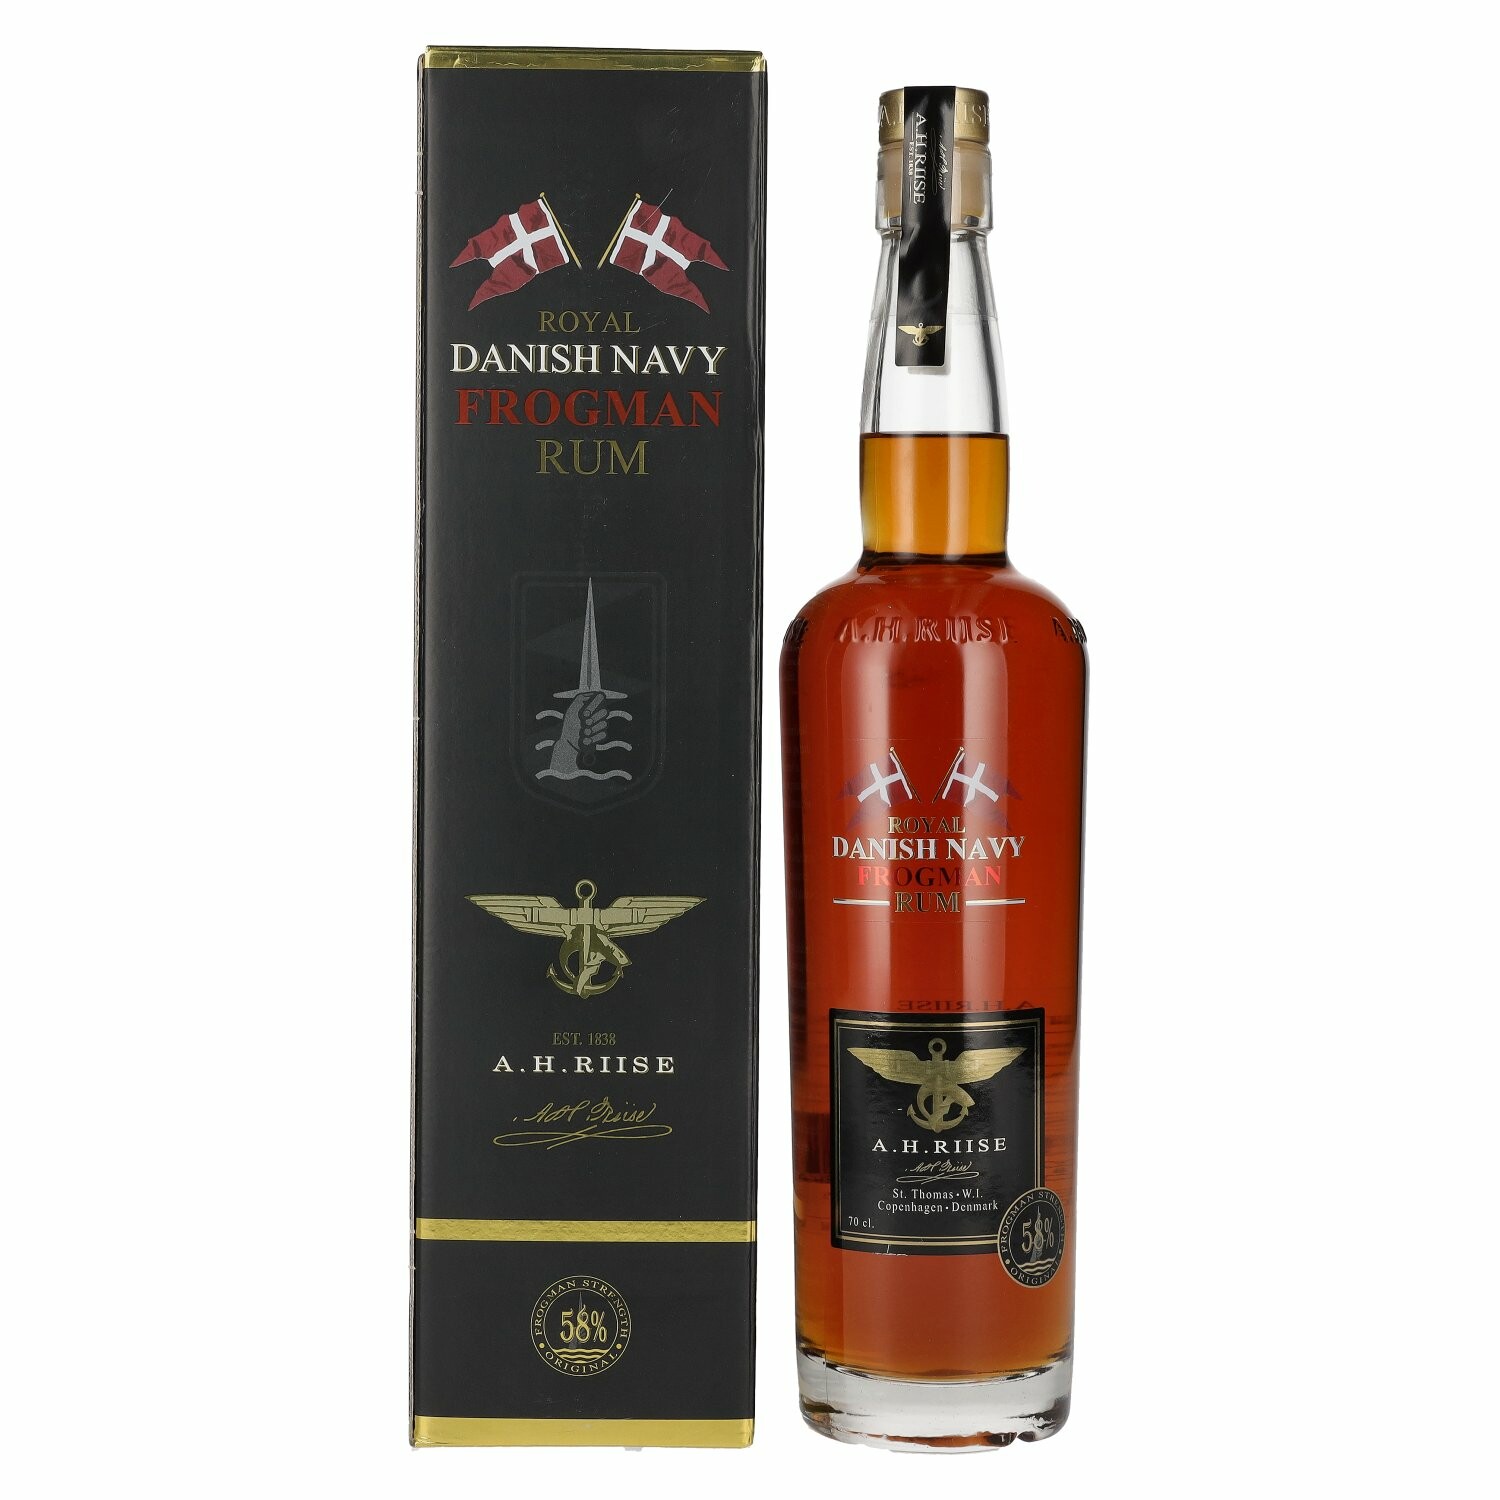 A.H. Riise Royal DANISH NAVY FROGMAN Rum 58% Vol. 0,7l in Giftbox